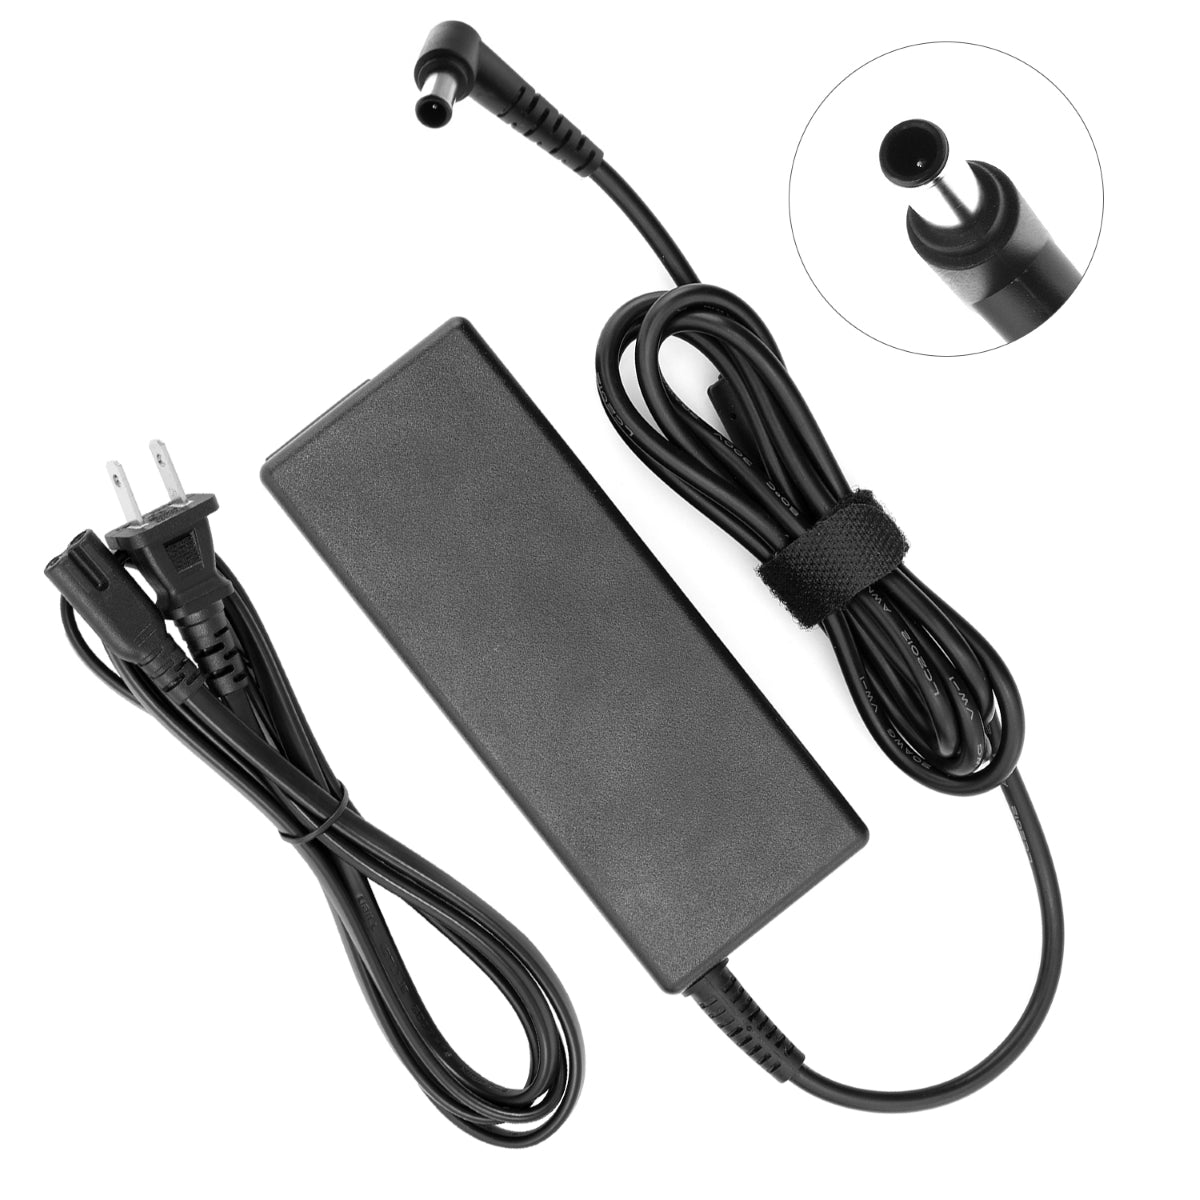 AC Adapter Power Supply for Samsung S23B350H Monitor